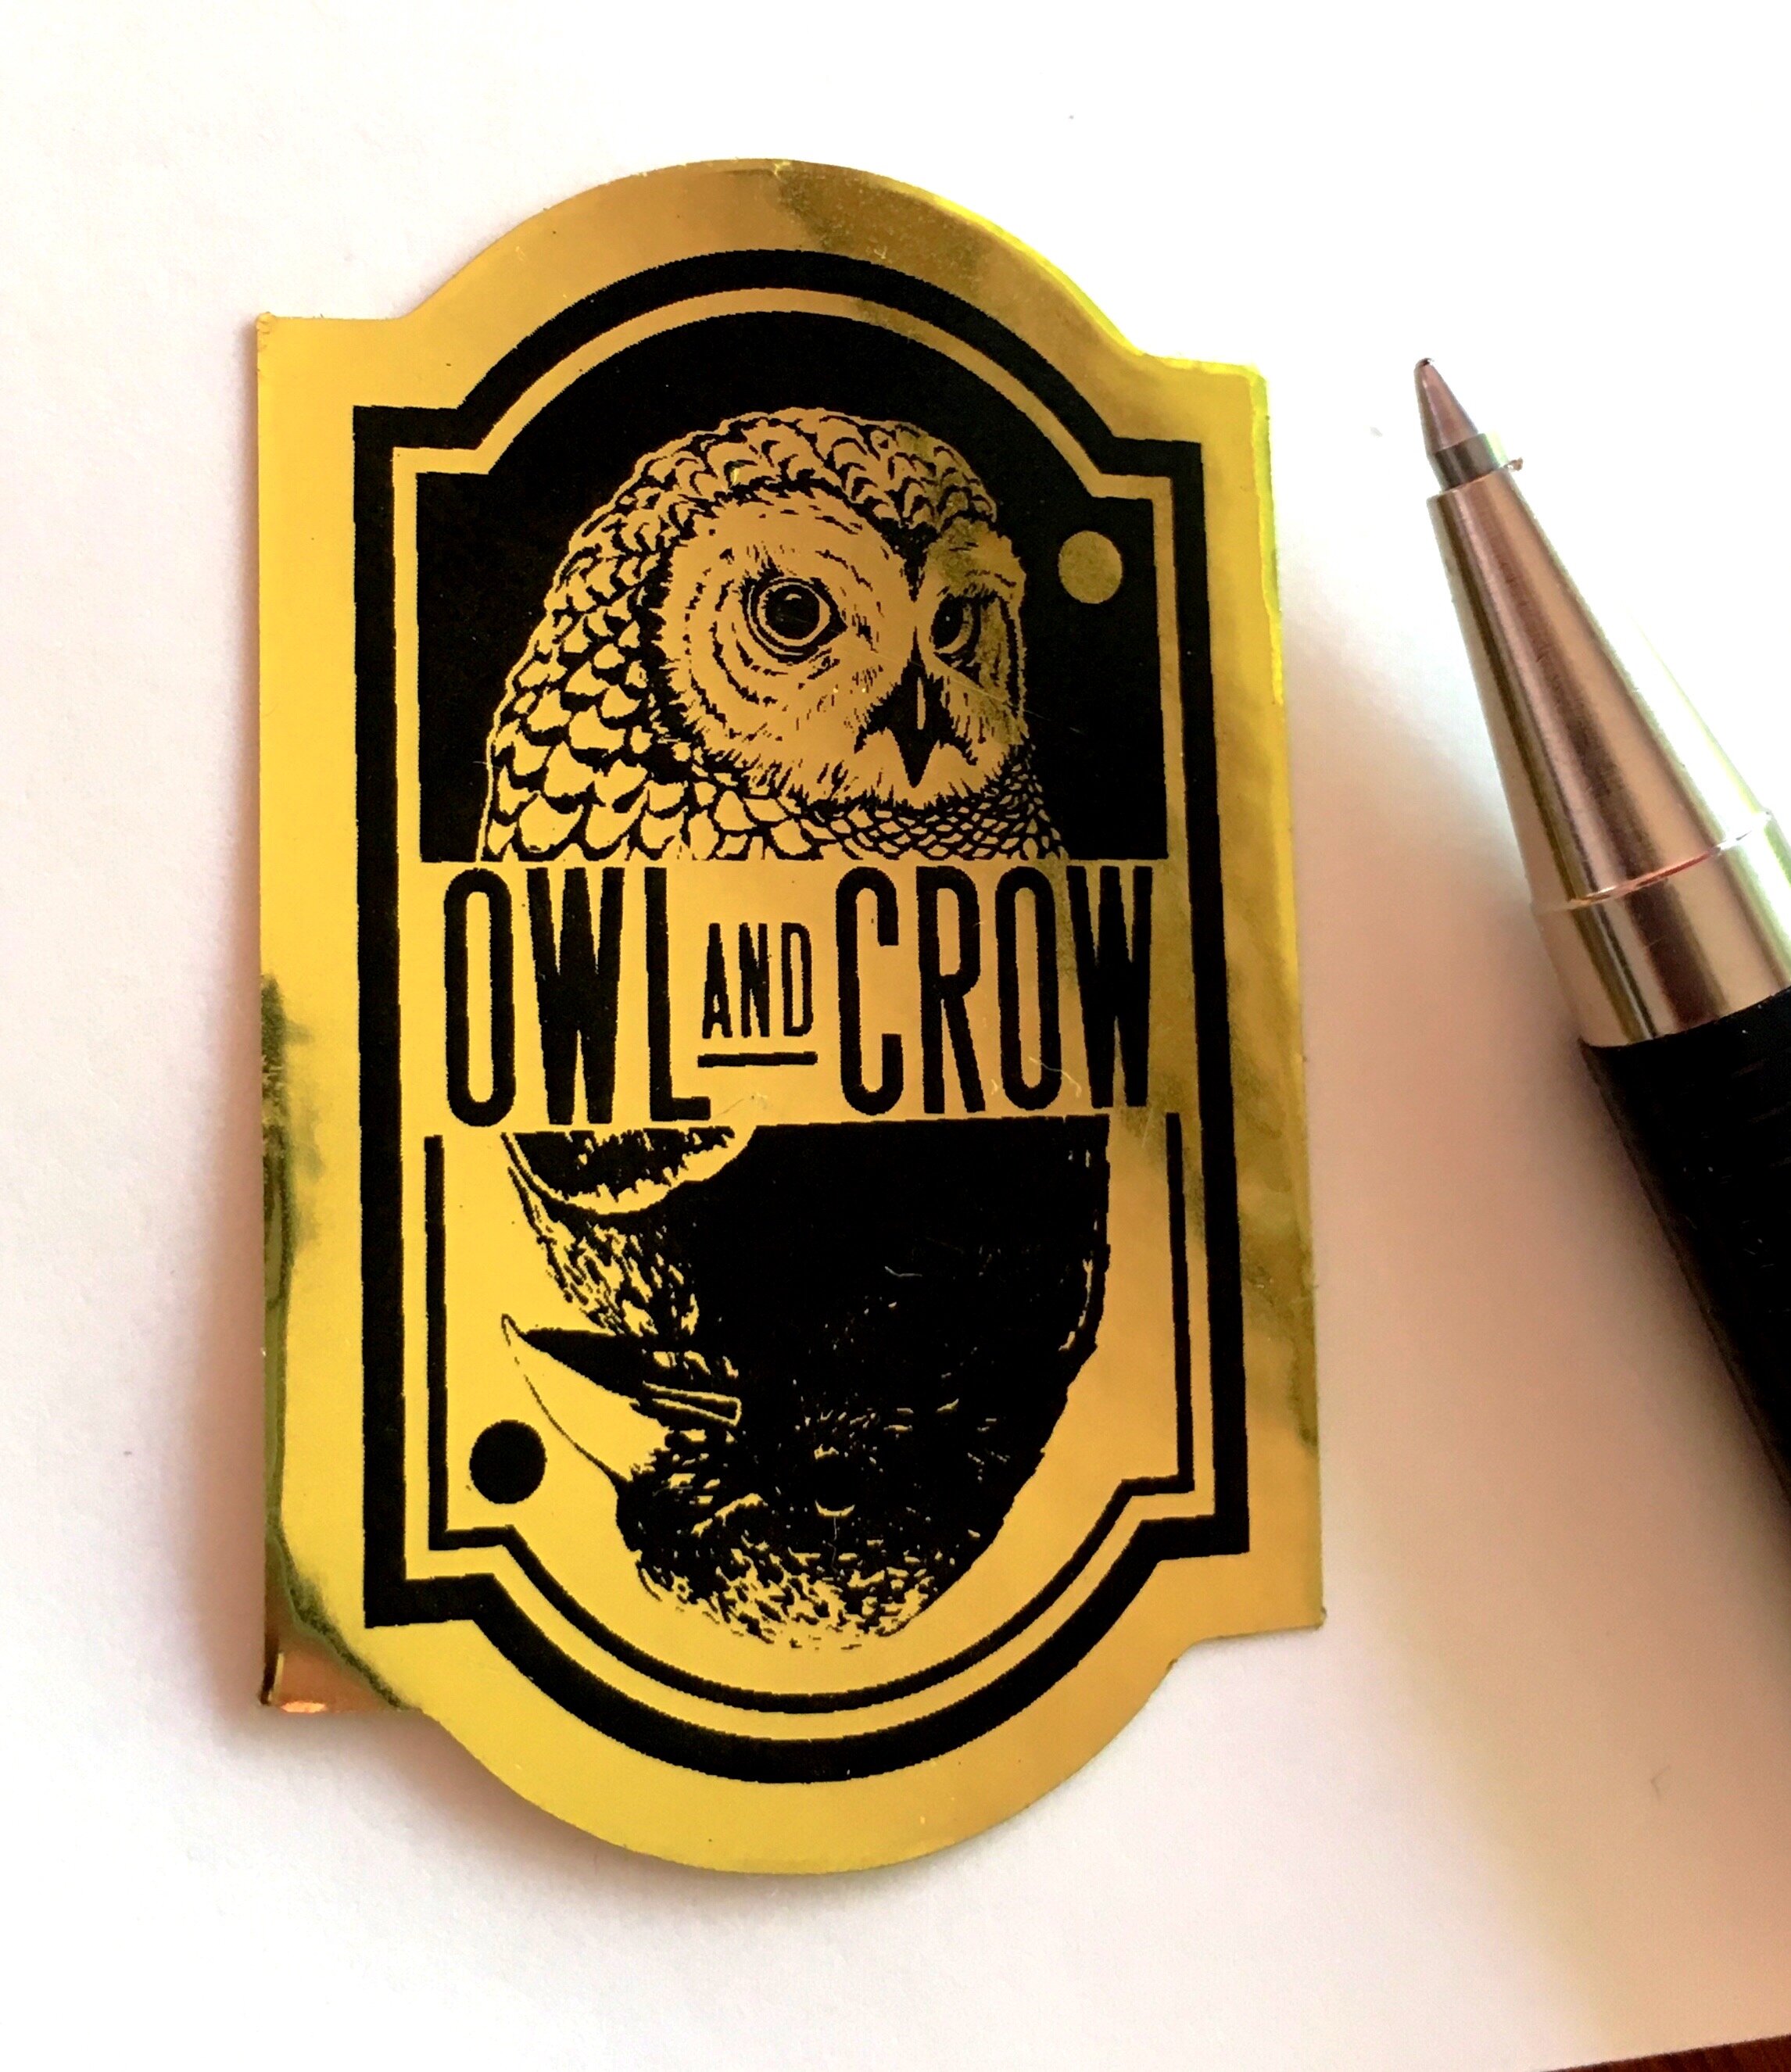 owl and crow gold label.jpg